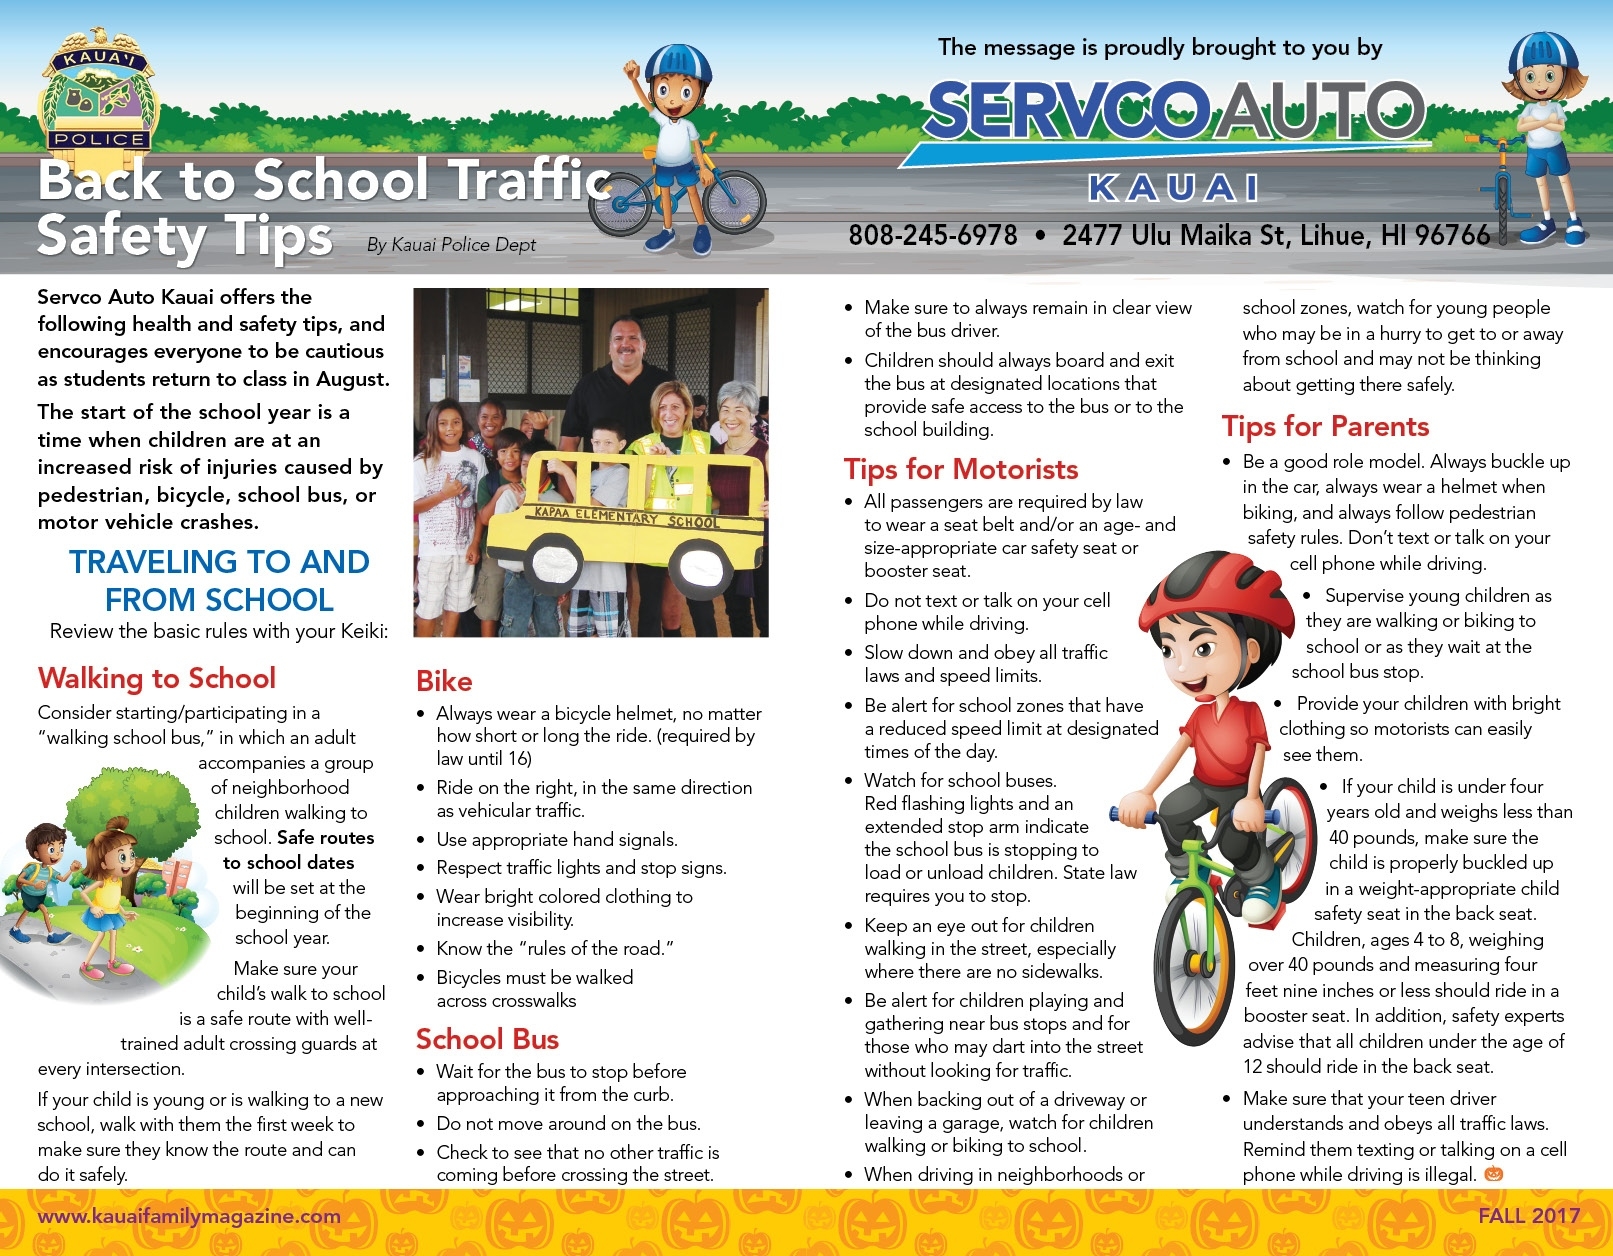 Back To School Safety Tips - Kauai Family Magazine What Date Do Schools Go Back In September 2021